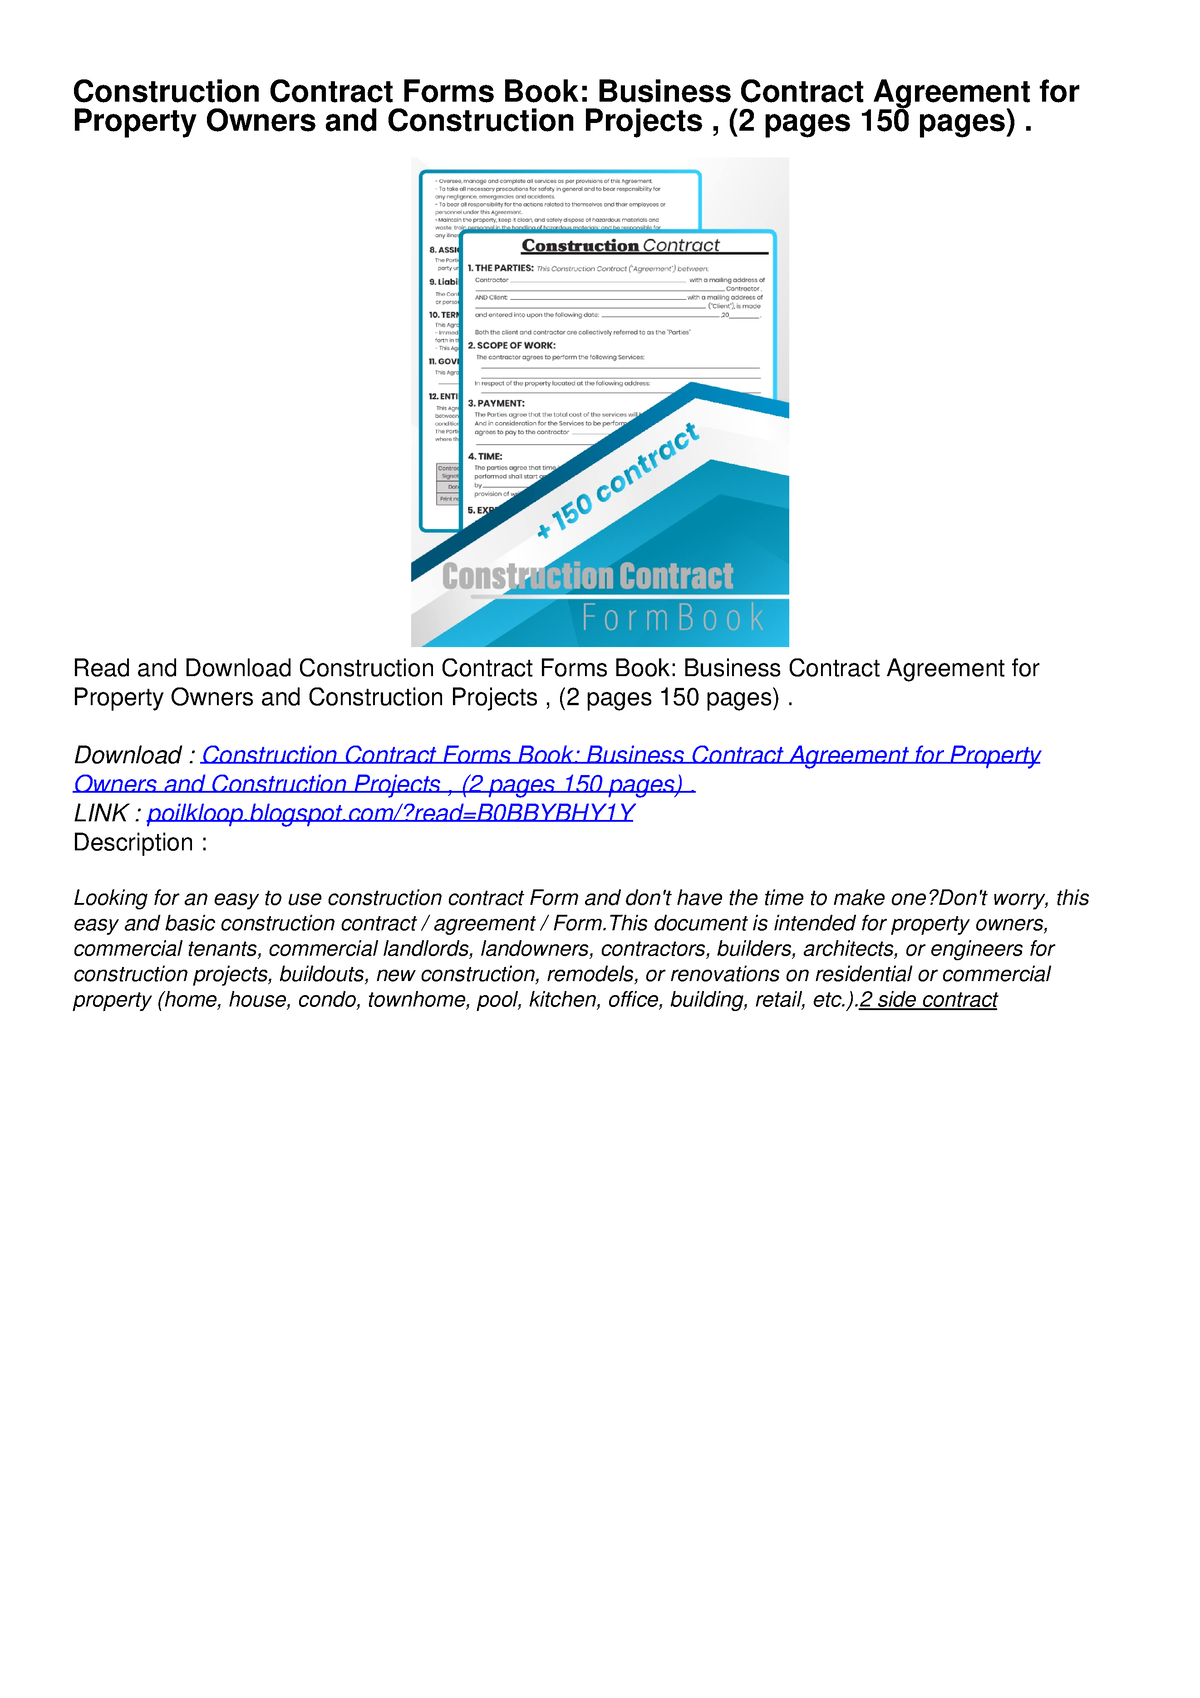 PDF Read Online Construction Contract Forms Book: Business Contract